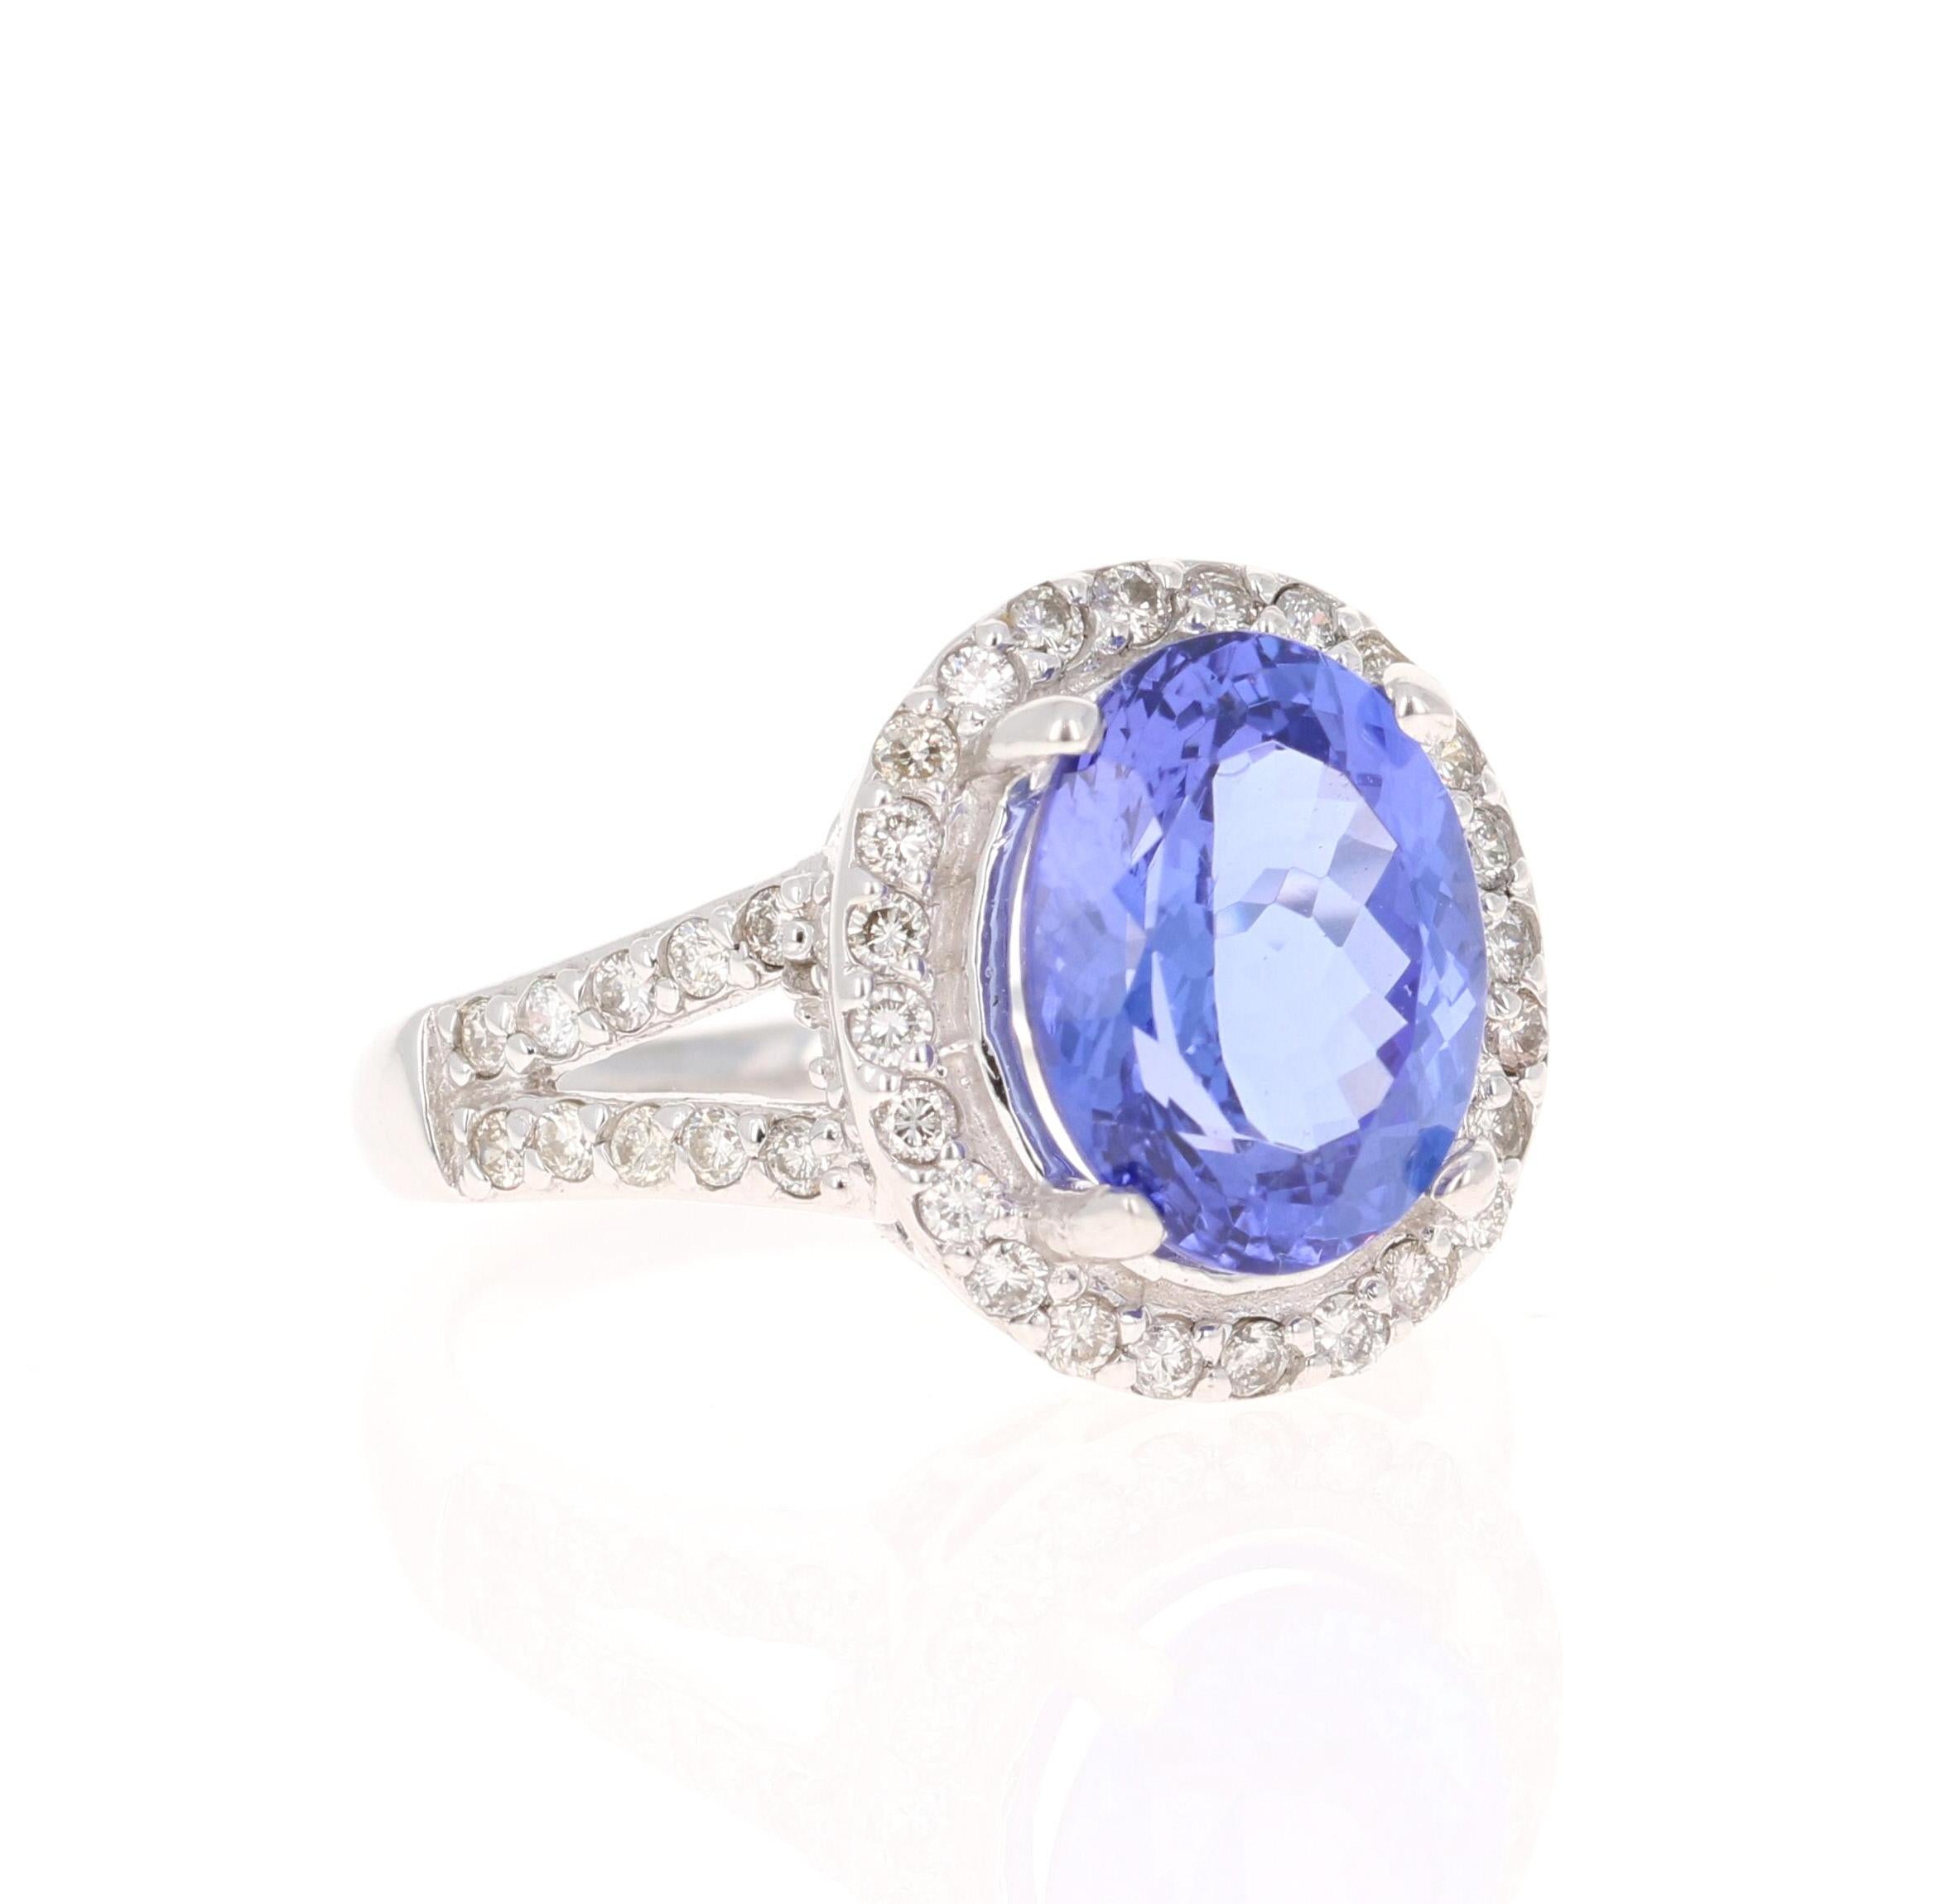 This beautiful ring has a vivid 4.33 Carat Oval Cut Tanzanite. The Tanzanite is surrounded by 44 Round Cut Diamonds that weigh 0.56 Carats. (Clarity: SI, Color: F)  The total carat weight of the ring is 4.89 Carats.  

The ring is made in 14K White